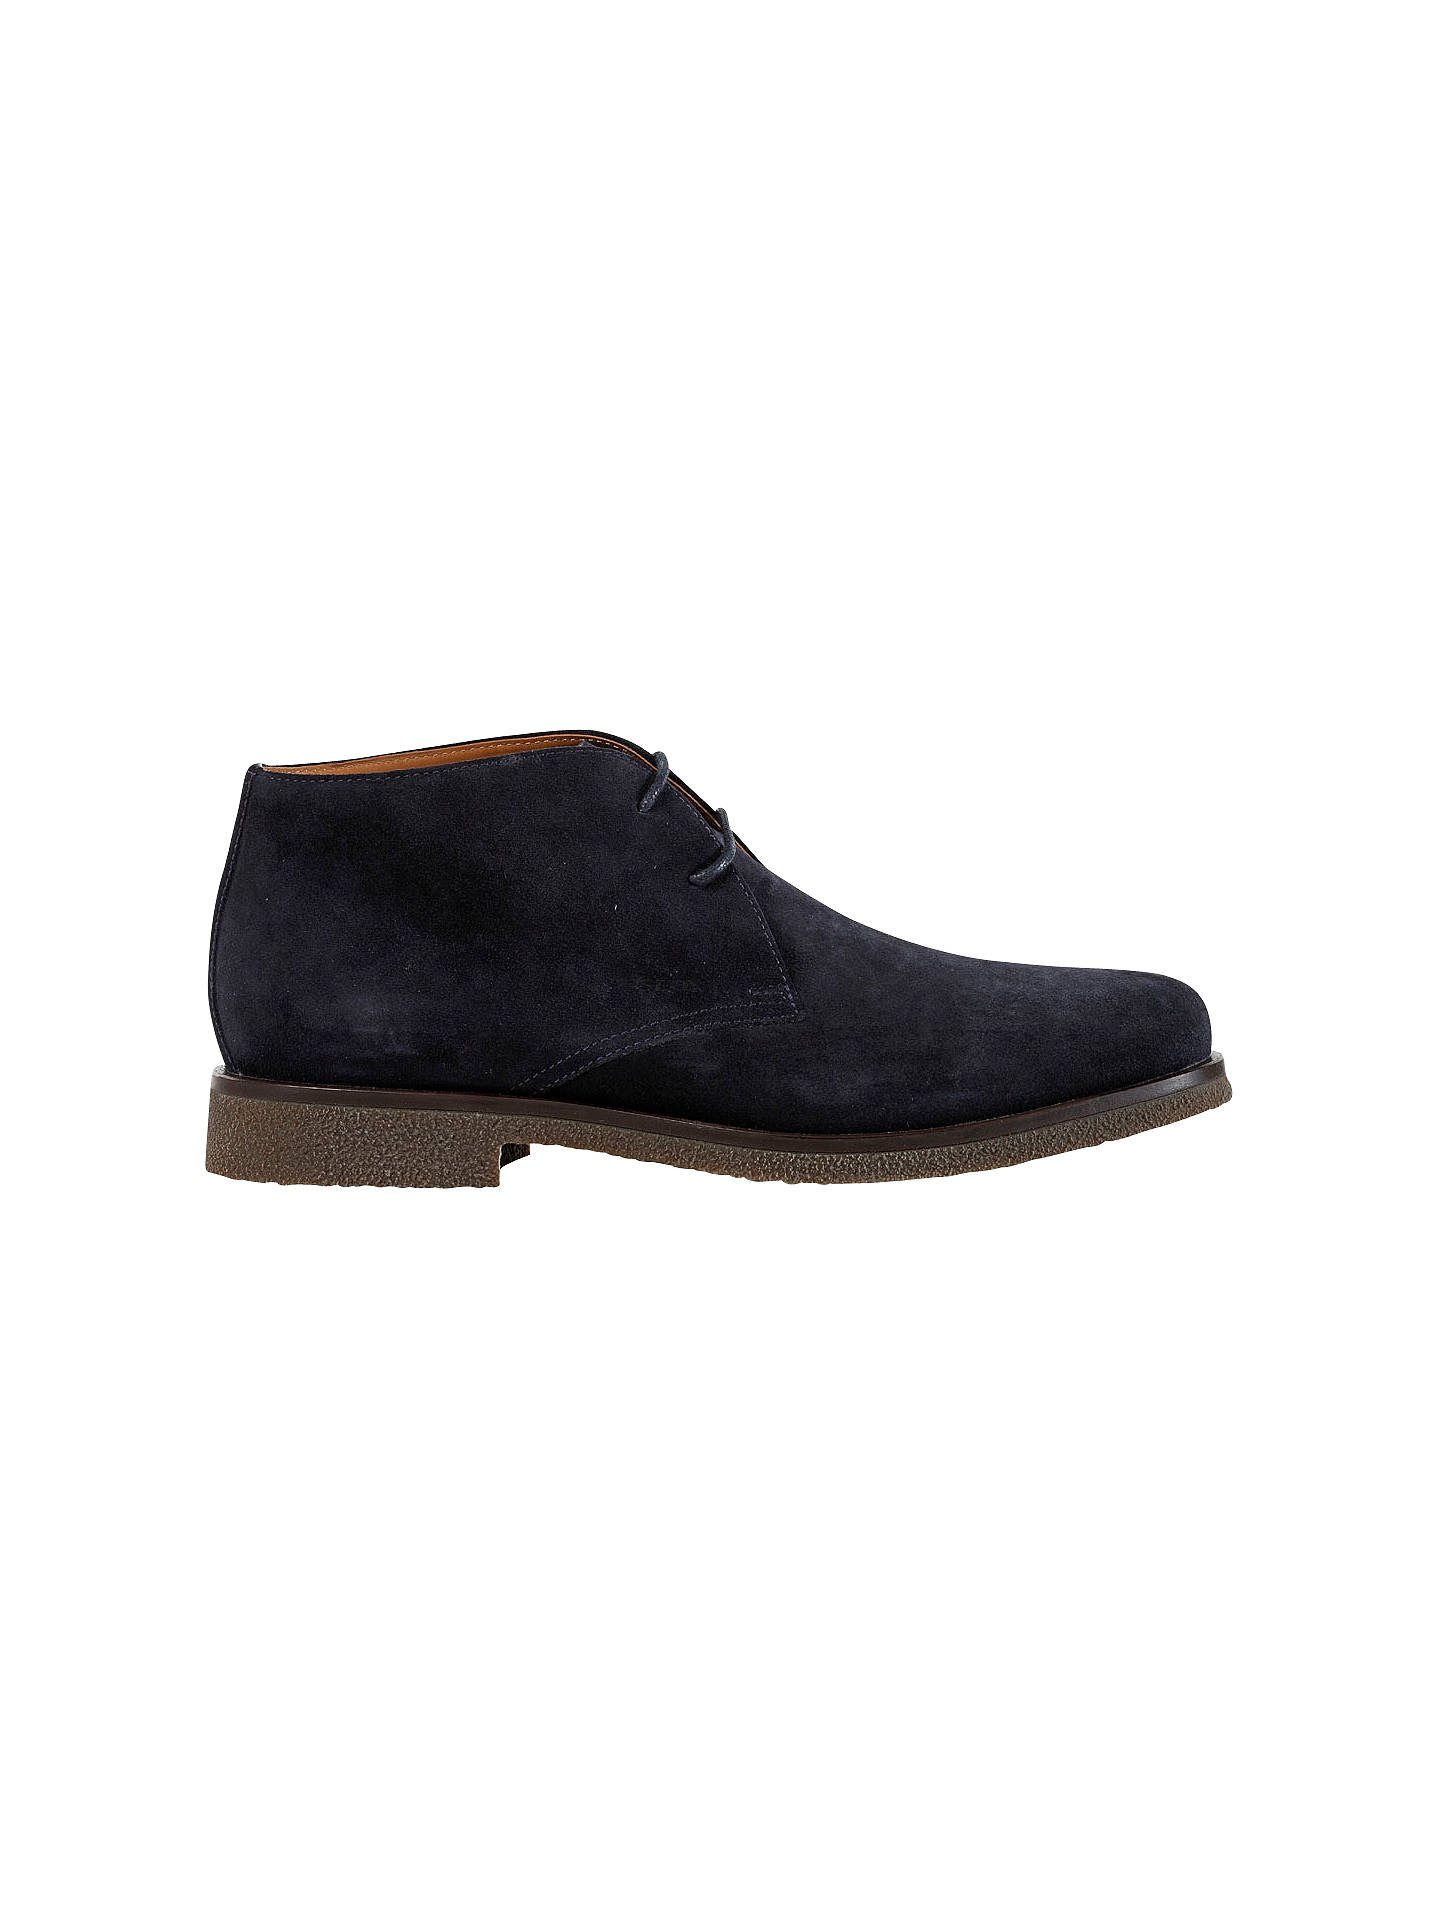 Geox Claudio Suede Chukka Boots at John Lewis & Partners